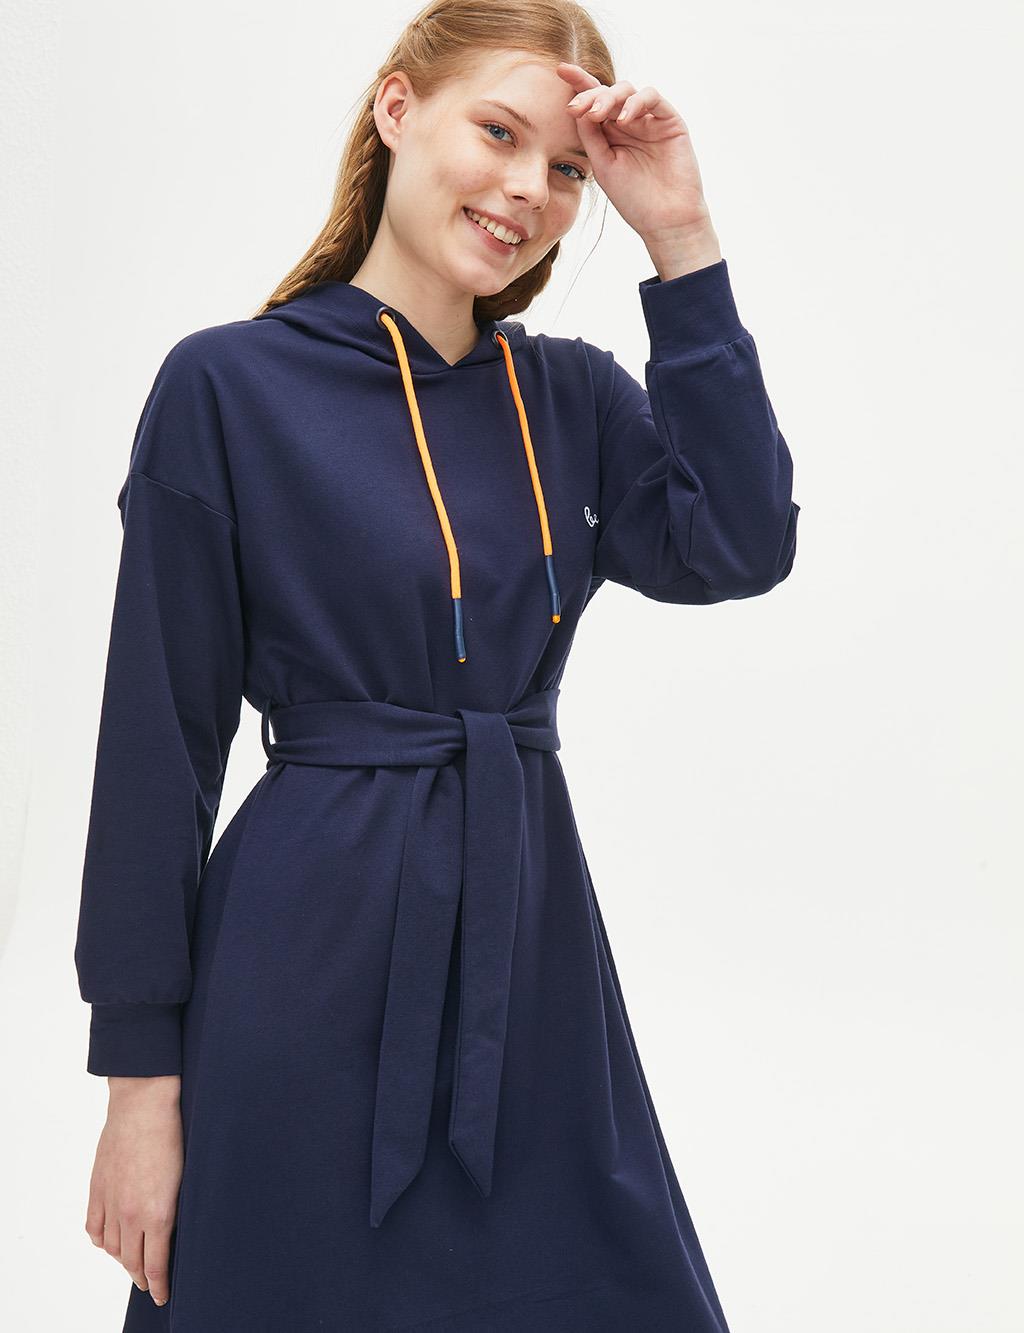 Belted Low Sleeve Long Dress Navy